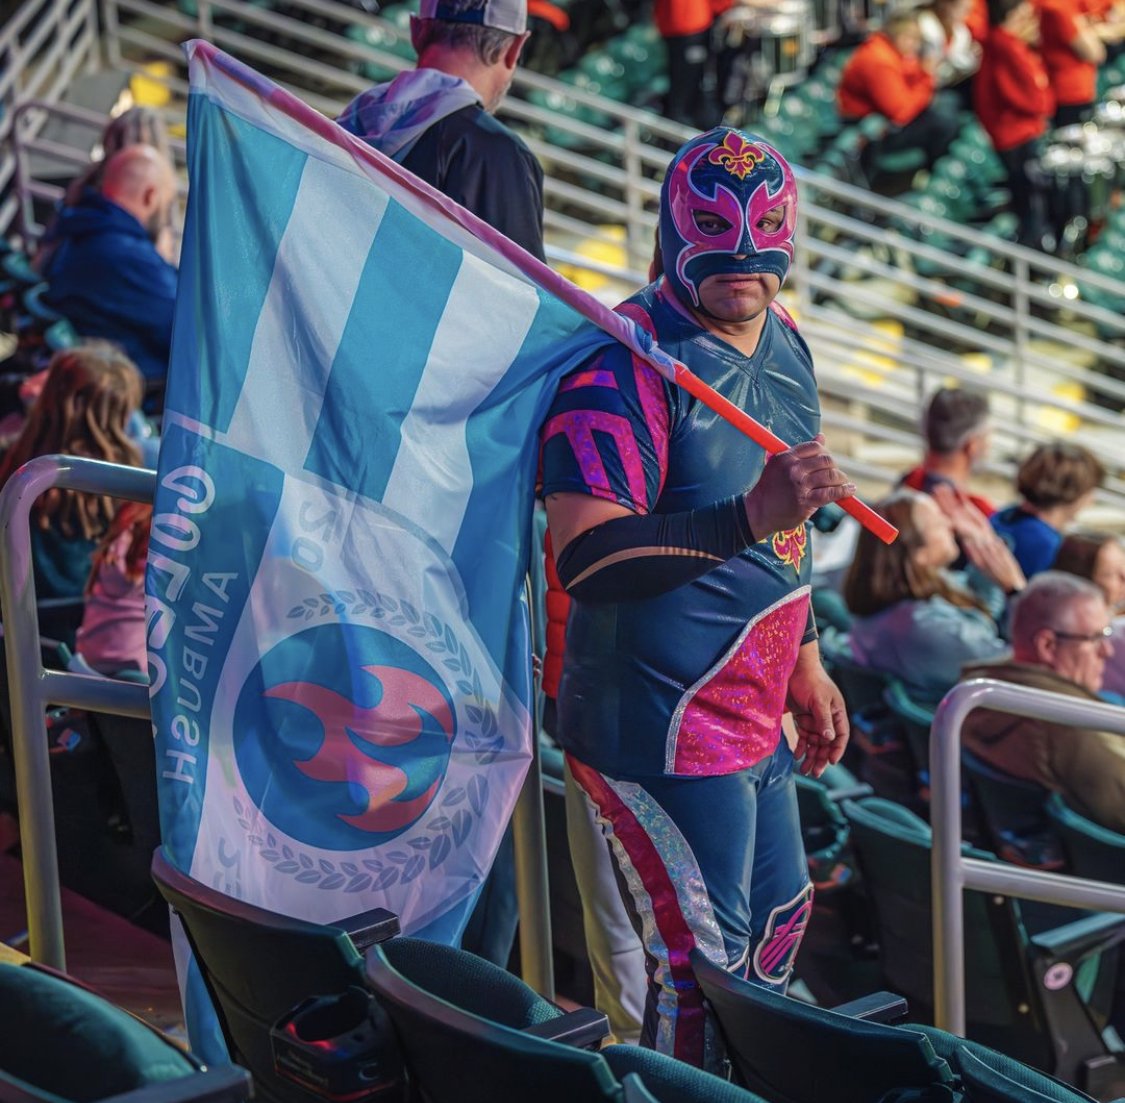 A member of the STL Santos, one of the groups in Colectivo Ambush, at an Ambush game at the Family Arena on Dec. 12.